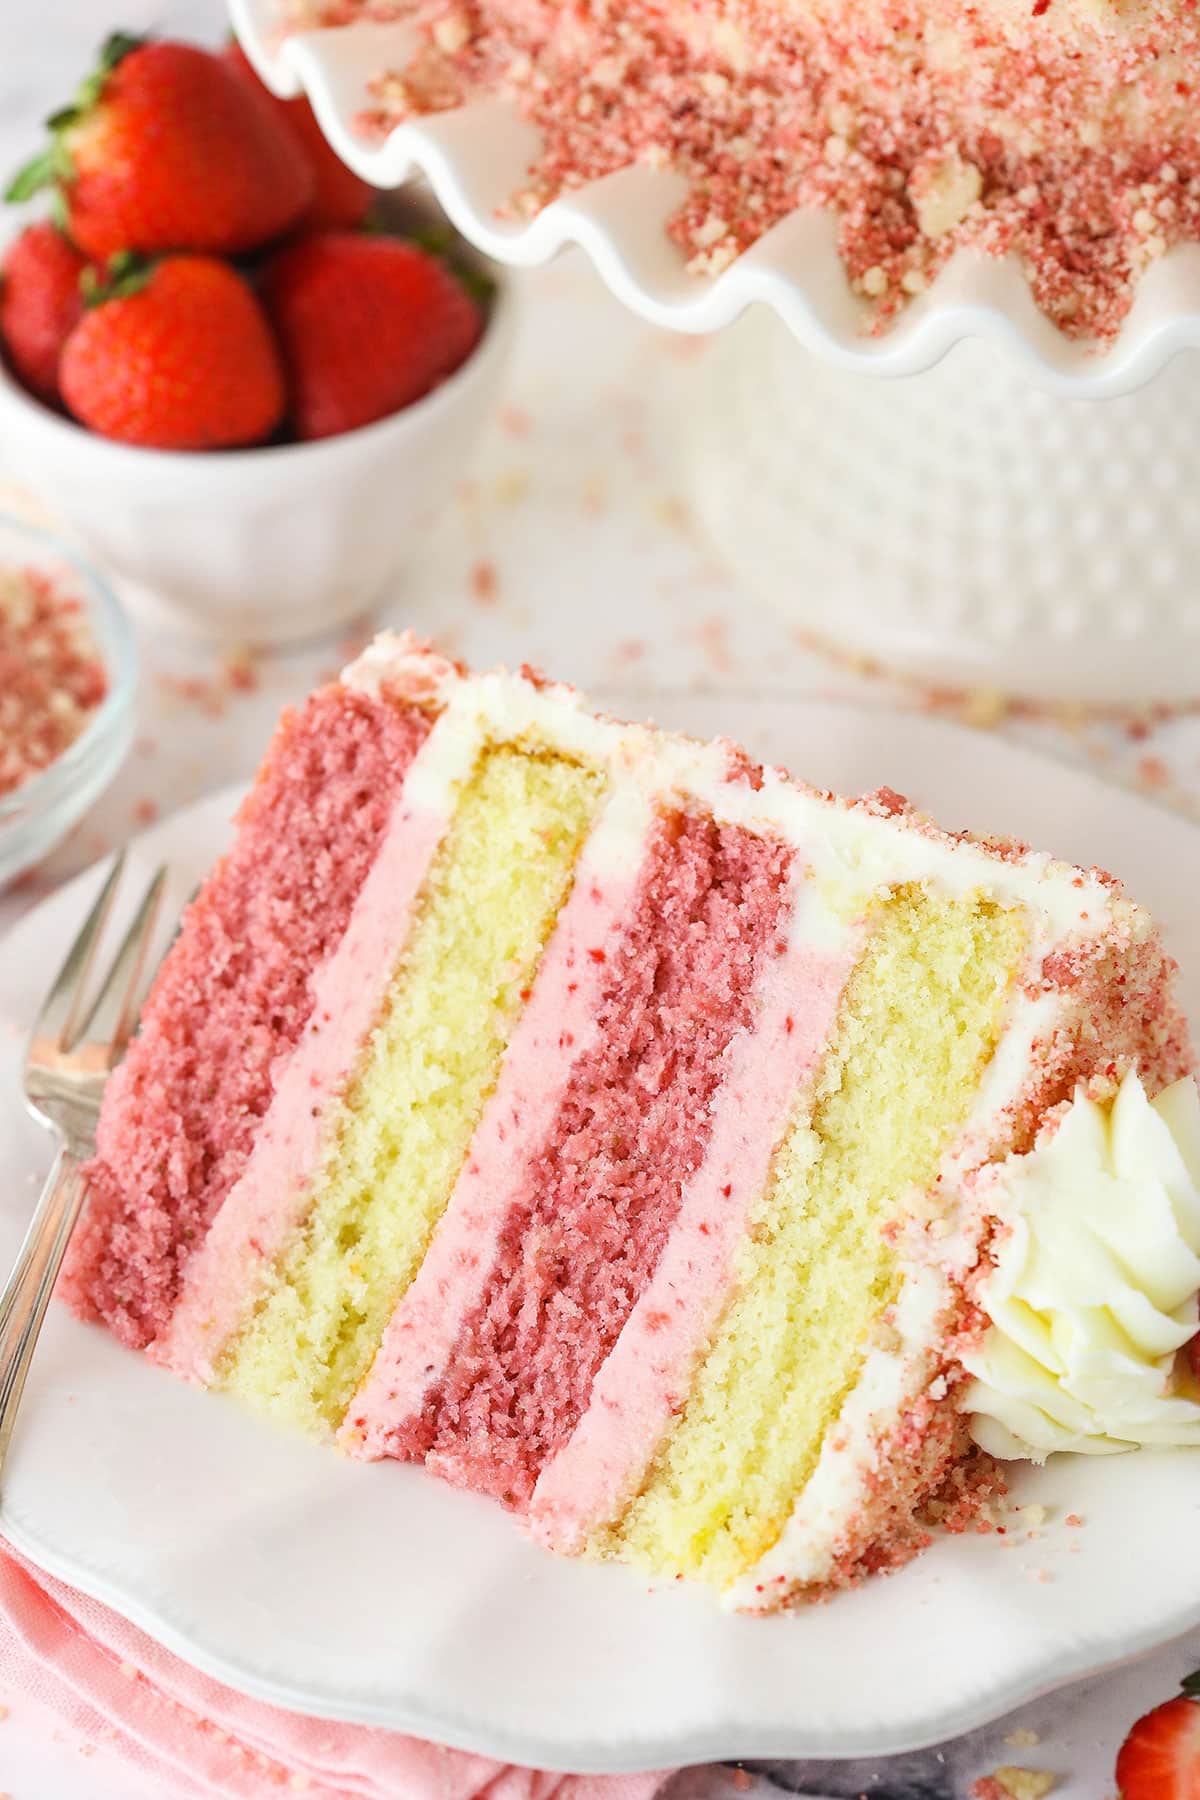 A slice of Strawberry Crunchy Layer Cake on a white plate with a fork and strawberries in the background